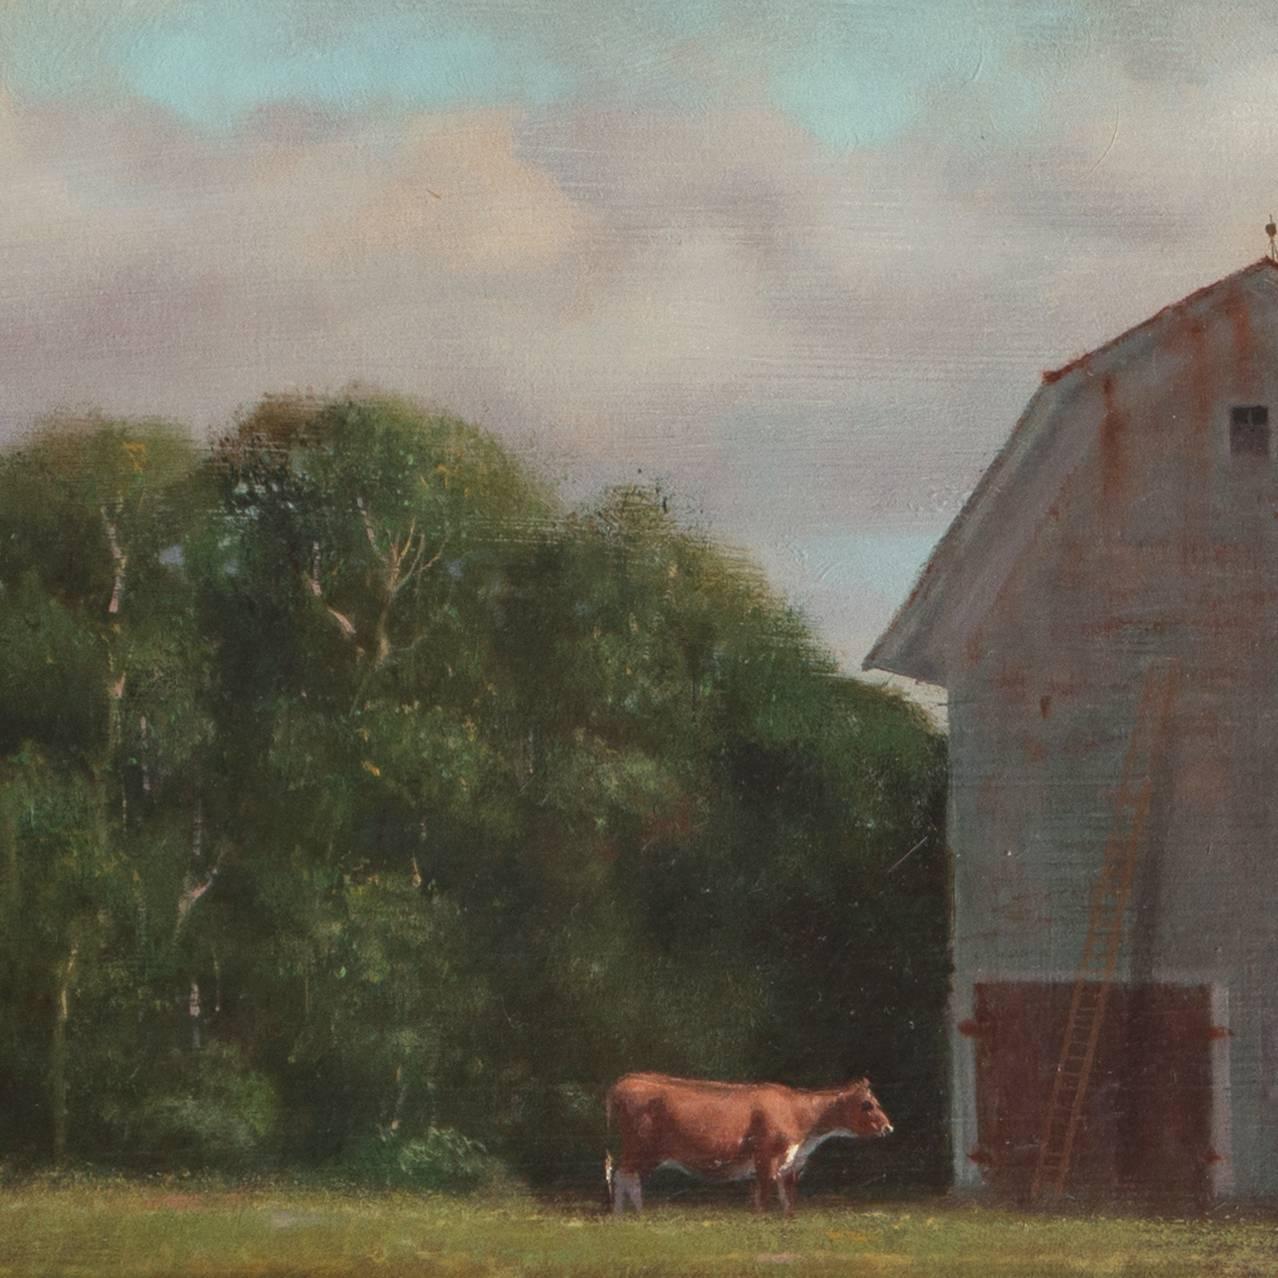 Signed lower right, 'Semple' for John Semple (American, born 1930) and painted circa 1970.

This realist painter and graphic artist first attended Hamilton College (B.A., 1953), where he was awarded full scholarships to both the Skowhegan School of